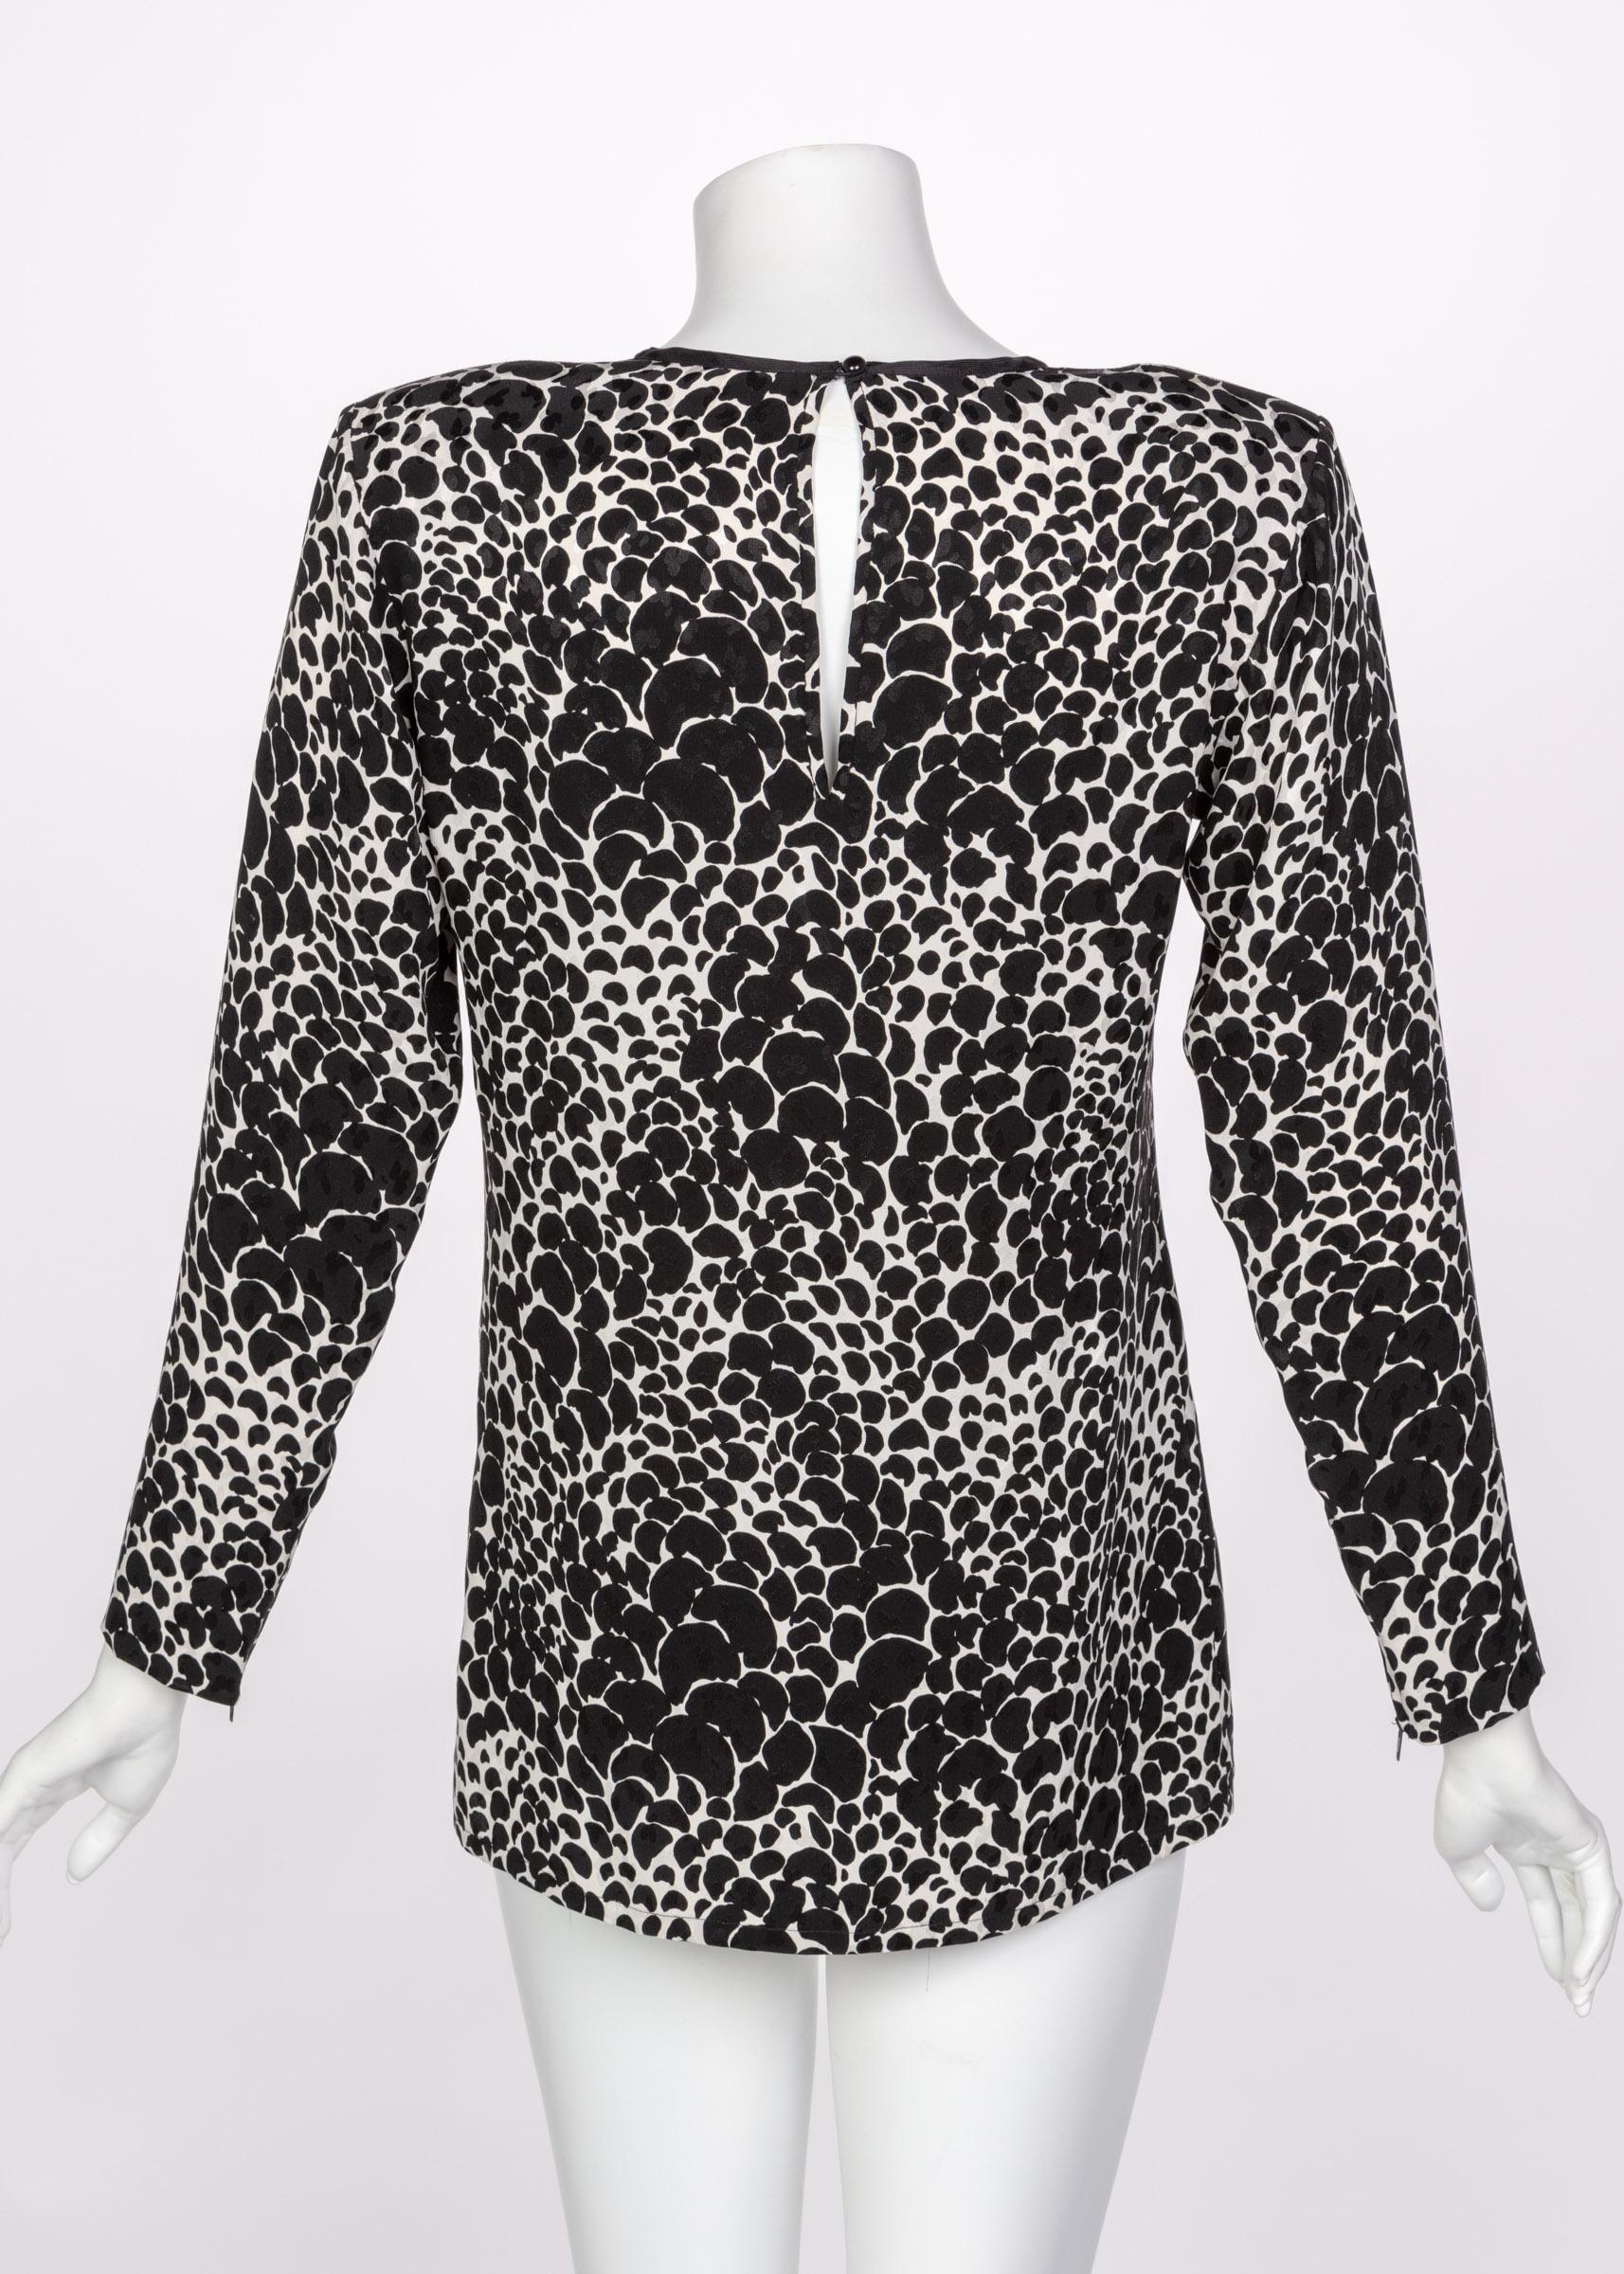 This 1970s Yves Saint Laurent blouse done in silk and covered in  black and white spotted print. Padded shoulders. Unlined this  blouse slips over the head  and closes closes at the neck with a round black plastic button. Professionally cleaned and